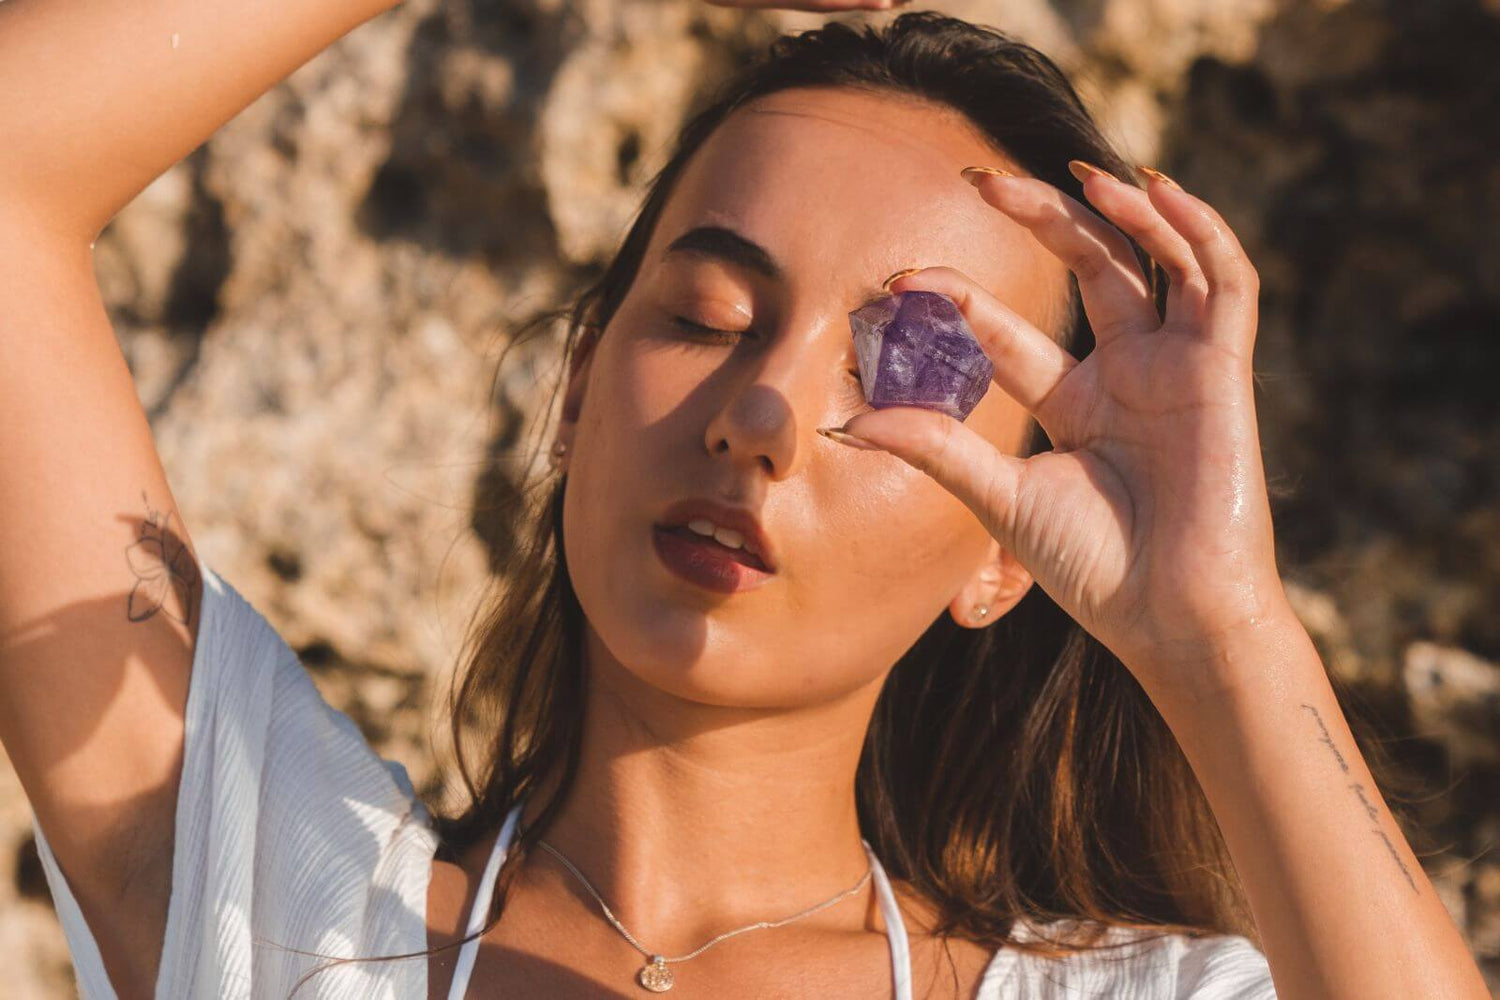 Crystals For Confidence: 12 Best Crystals For Confidence And Self-Love